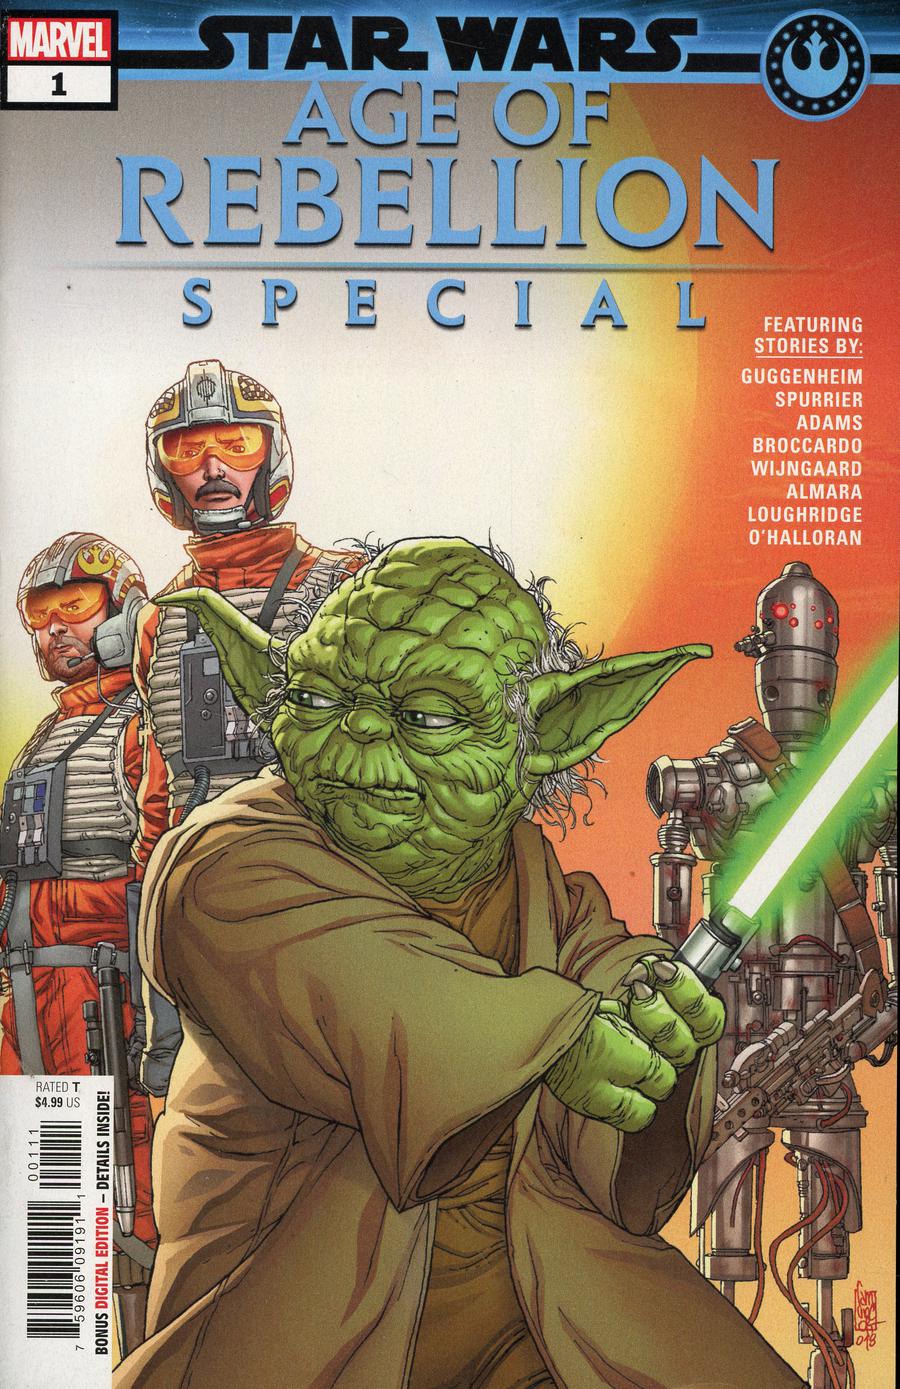 Star Wars: Age of Rebellion Special no. 1 (2019)